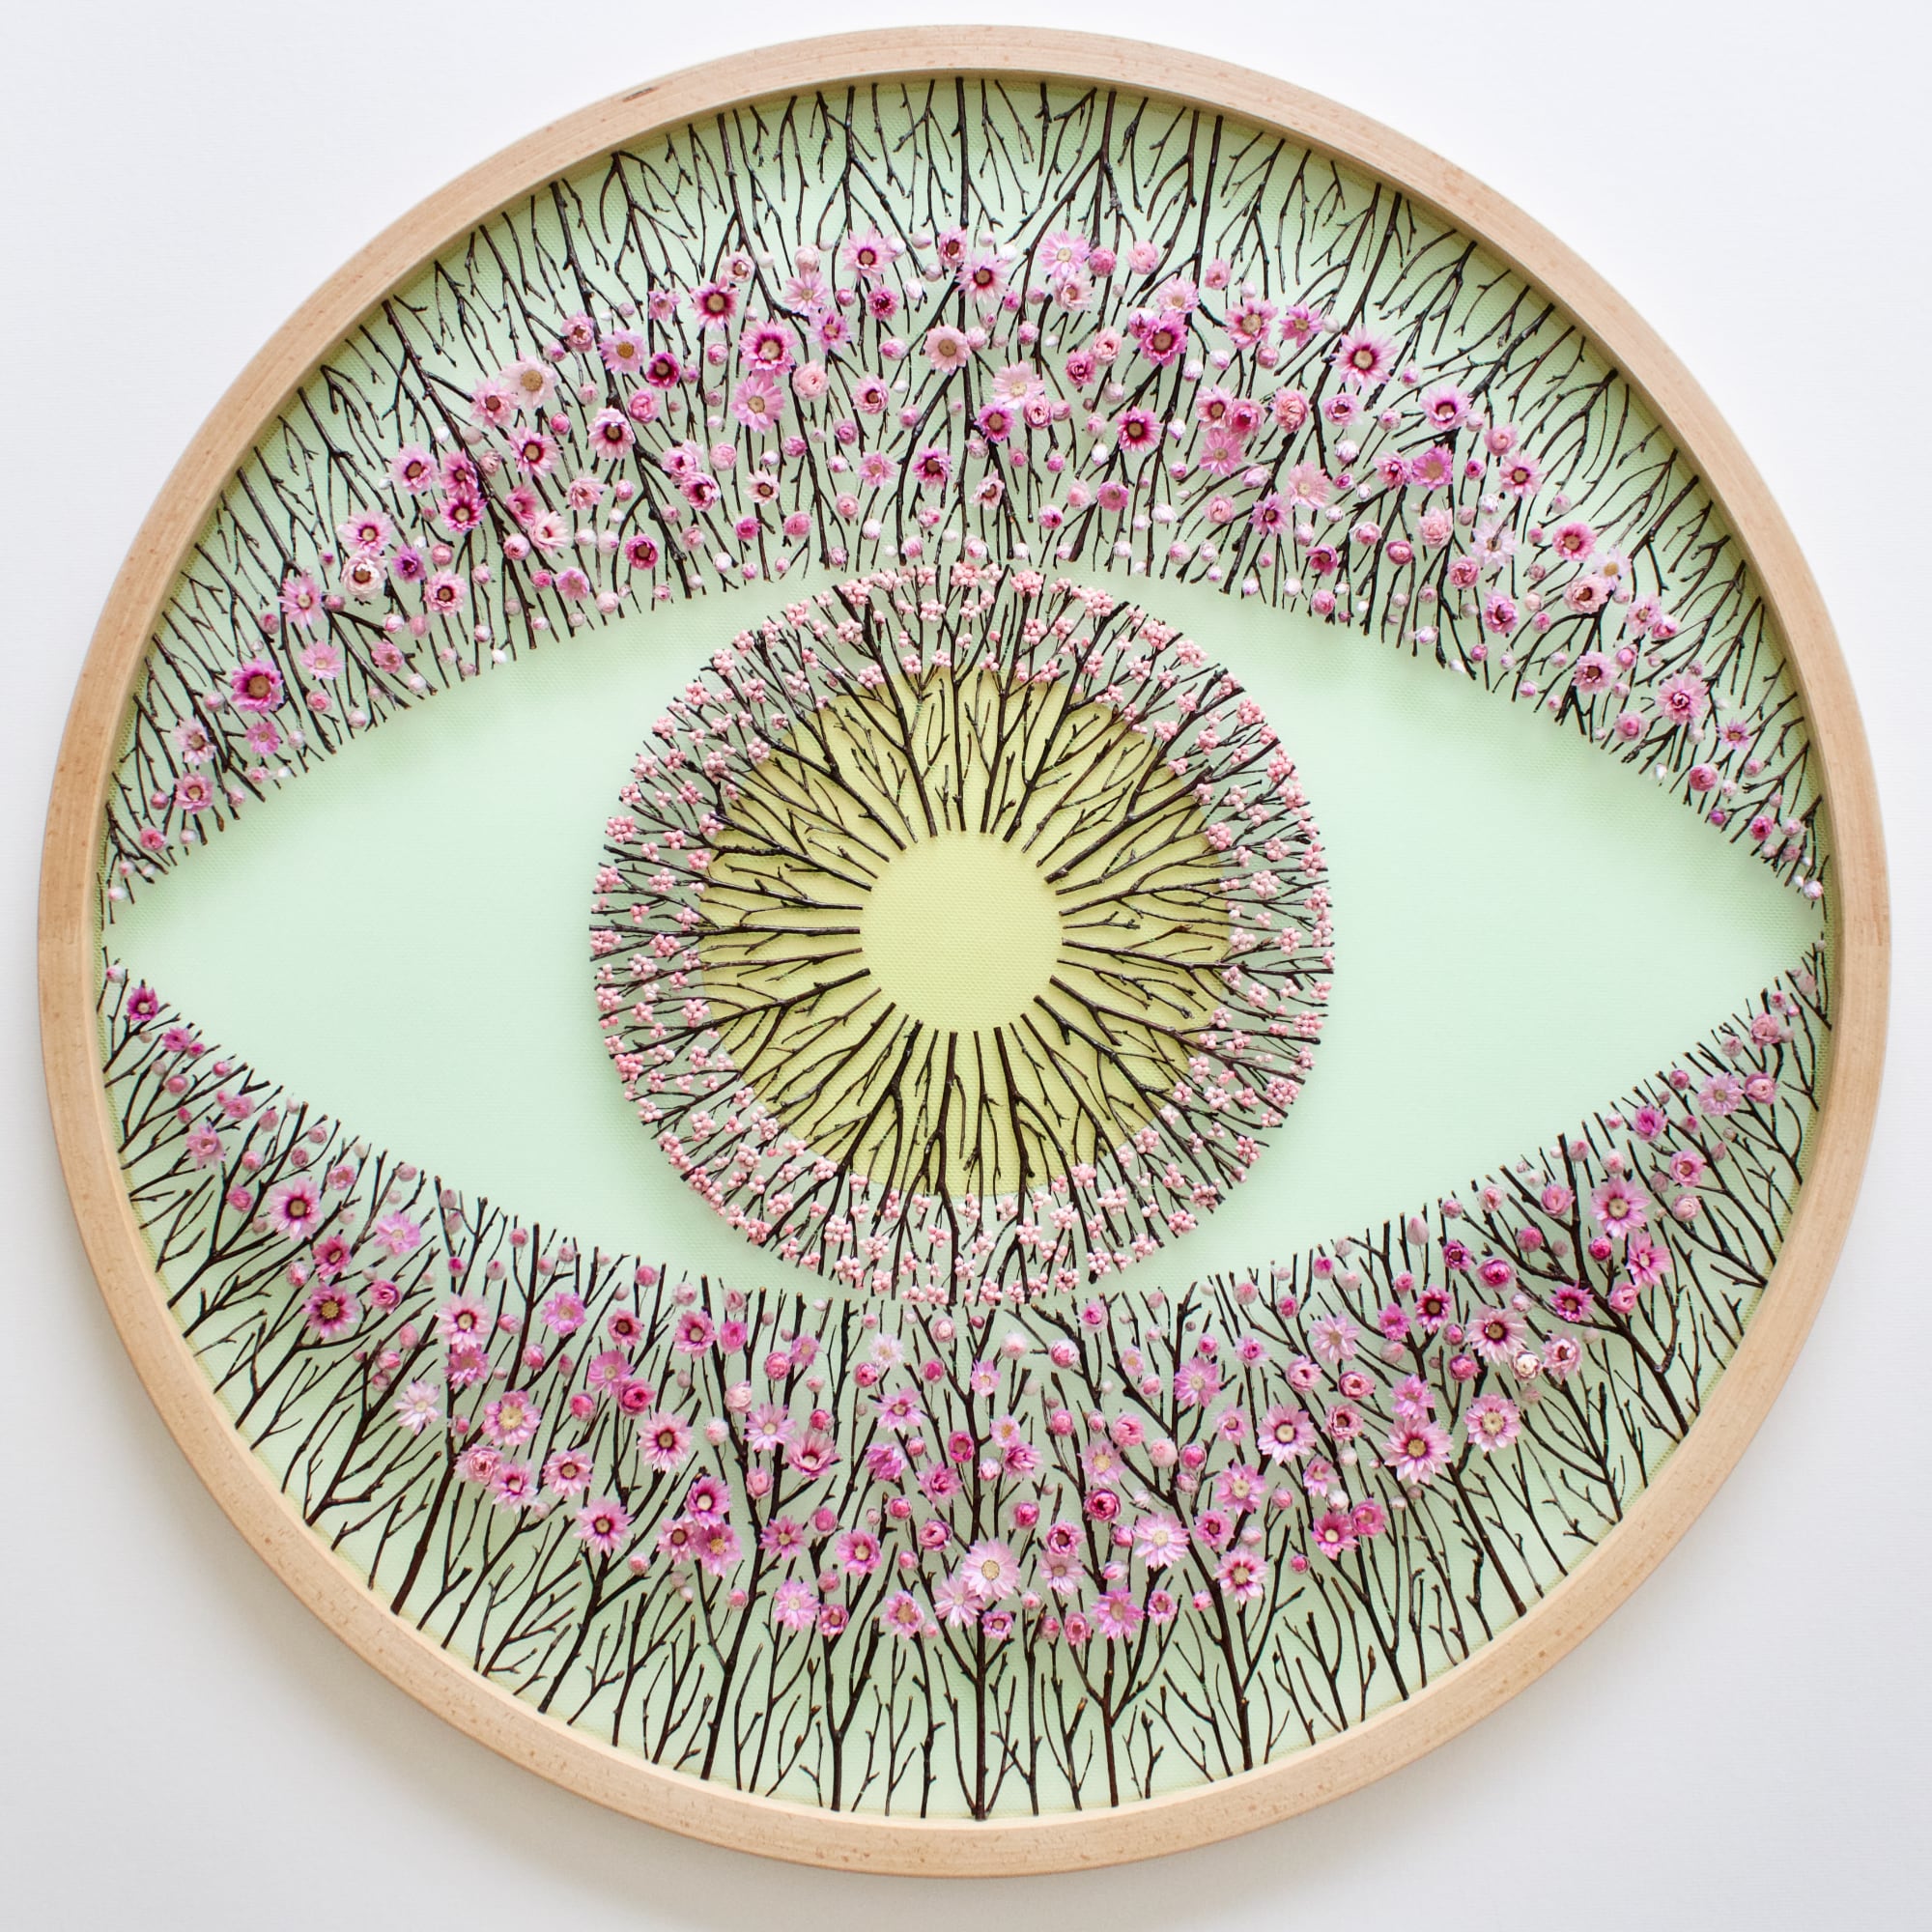 An embroidery artwork made with real flowers on a transparent surface, hinting at the shape of an eye.